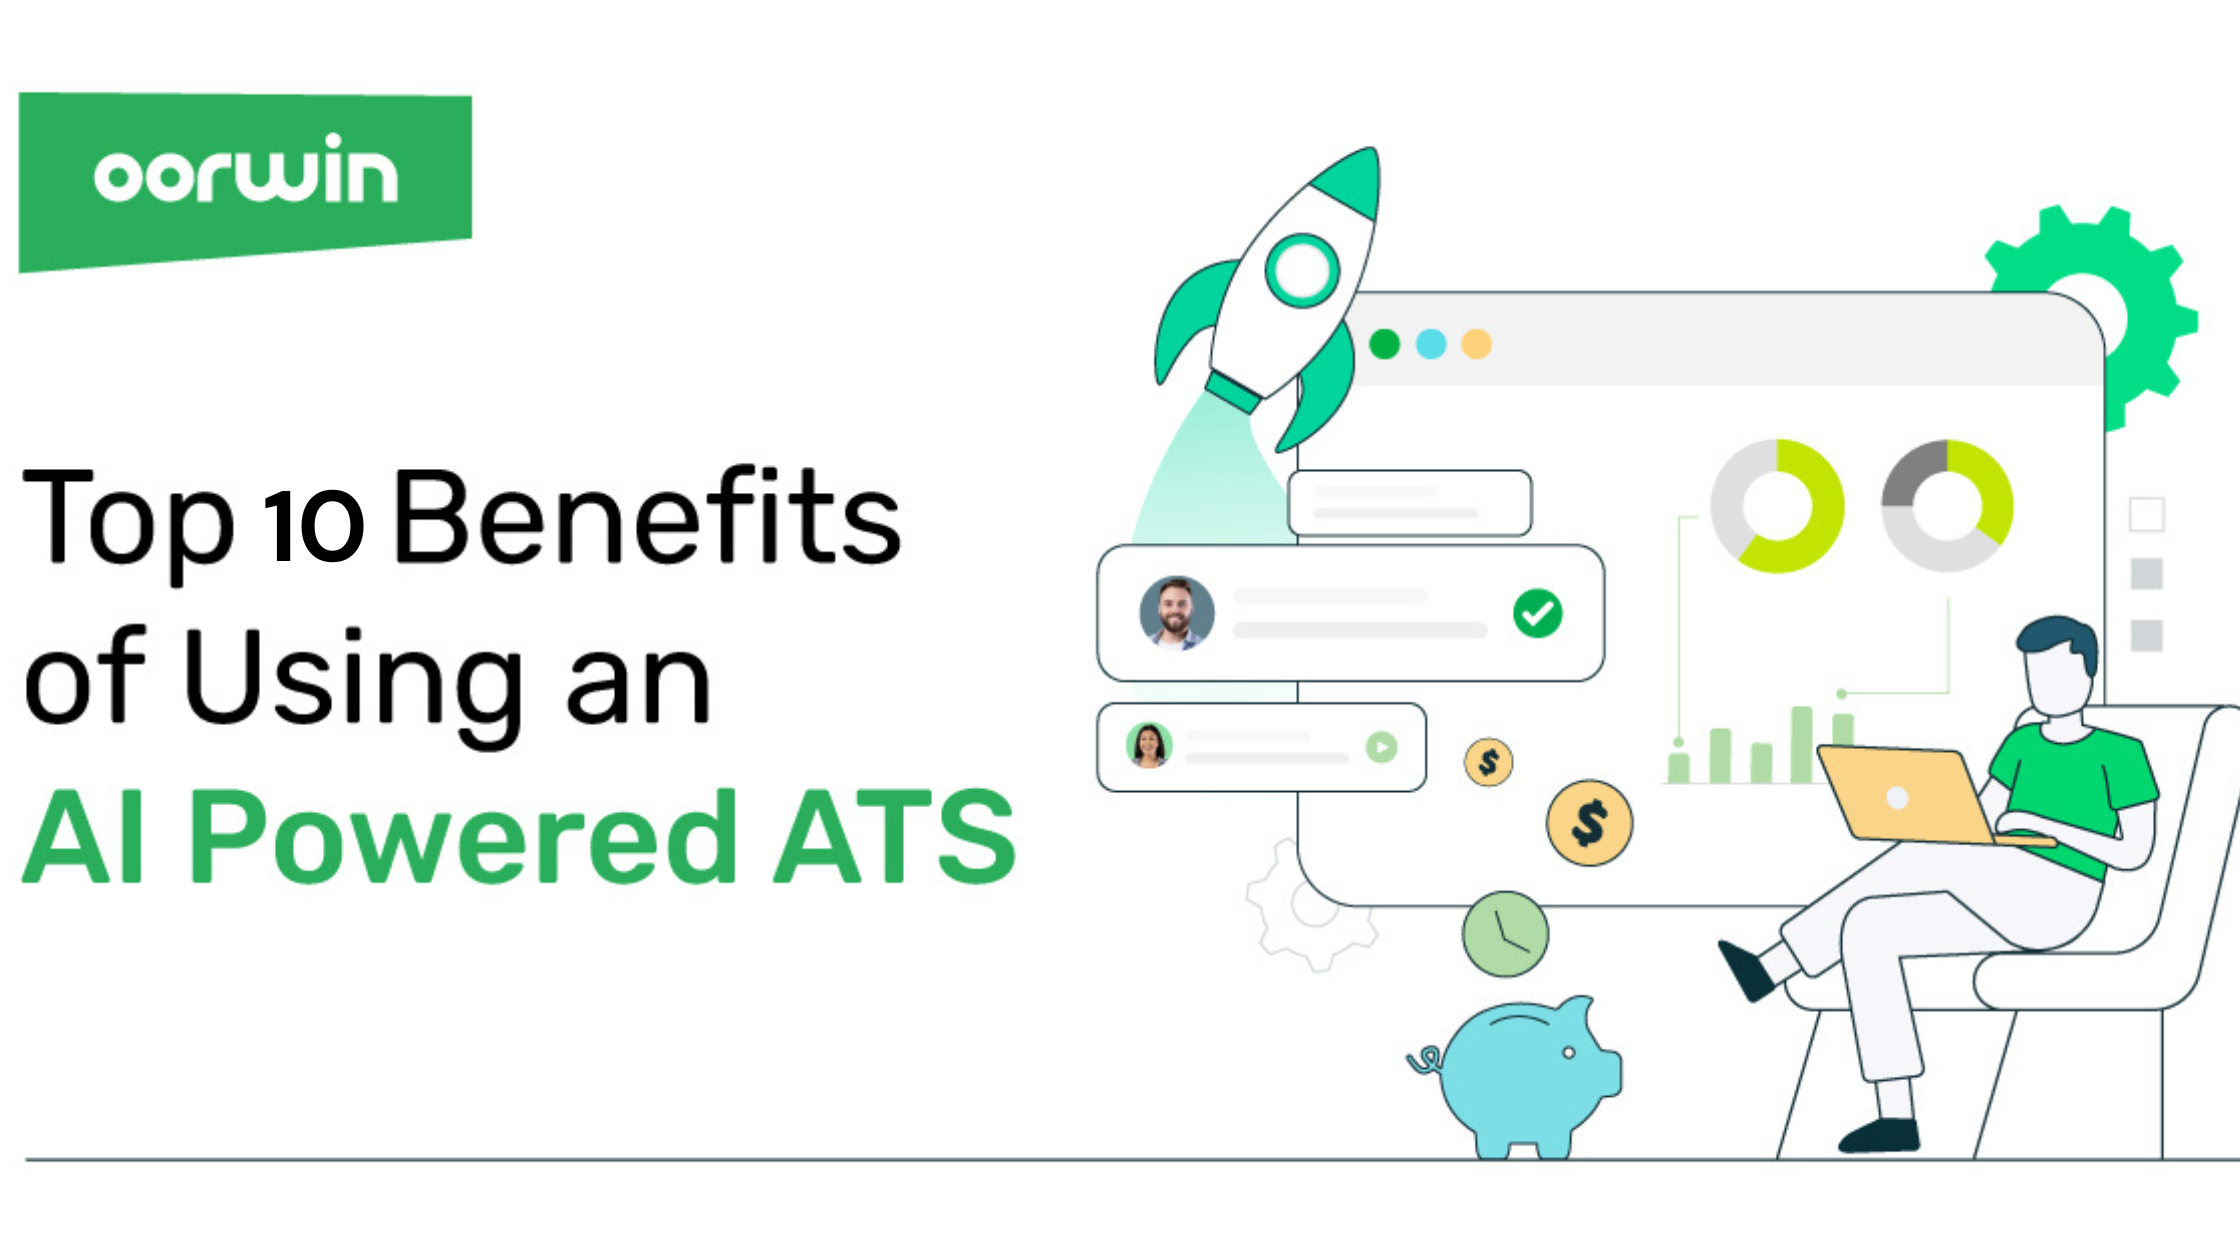 Top 12 Benefits of an Applicant Tracking System (ATS)